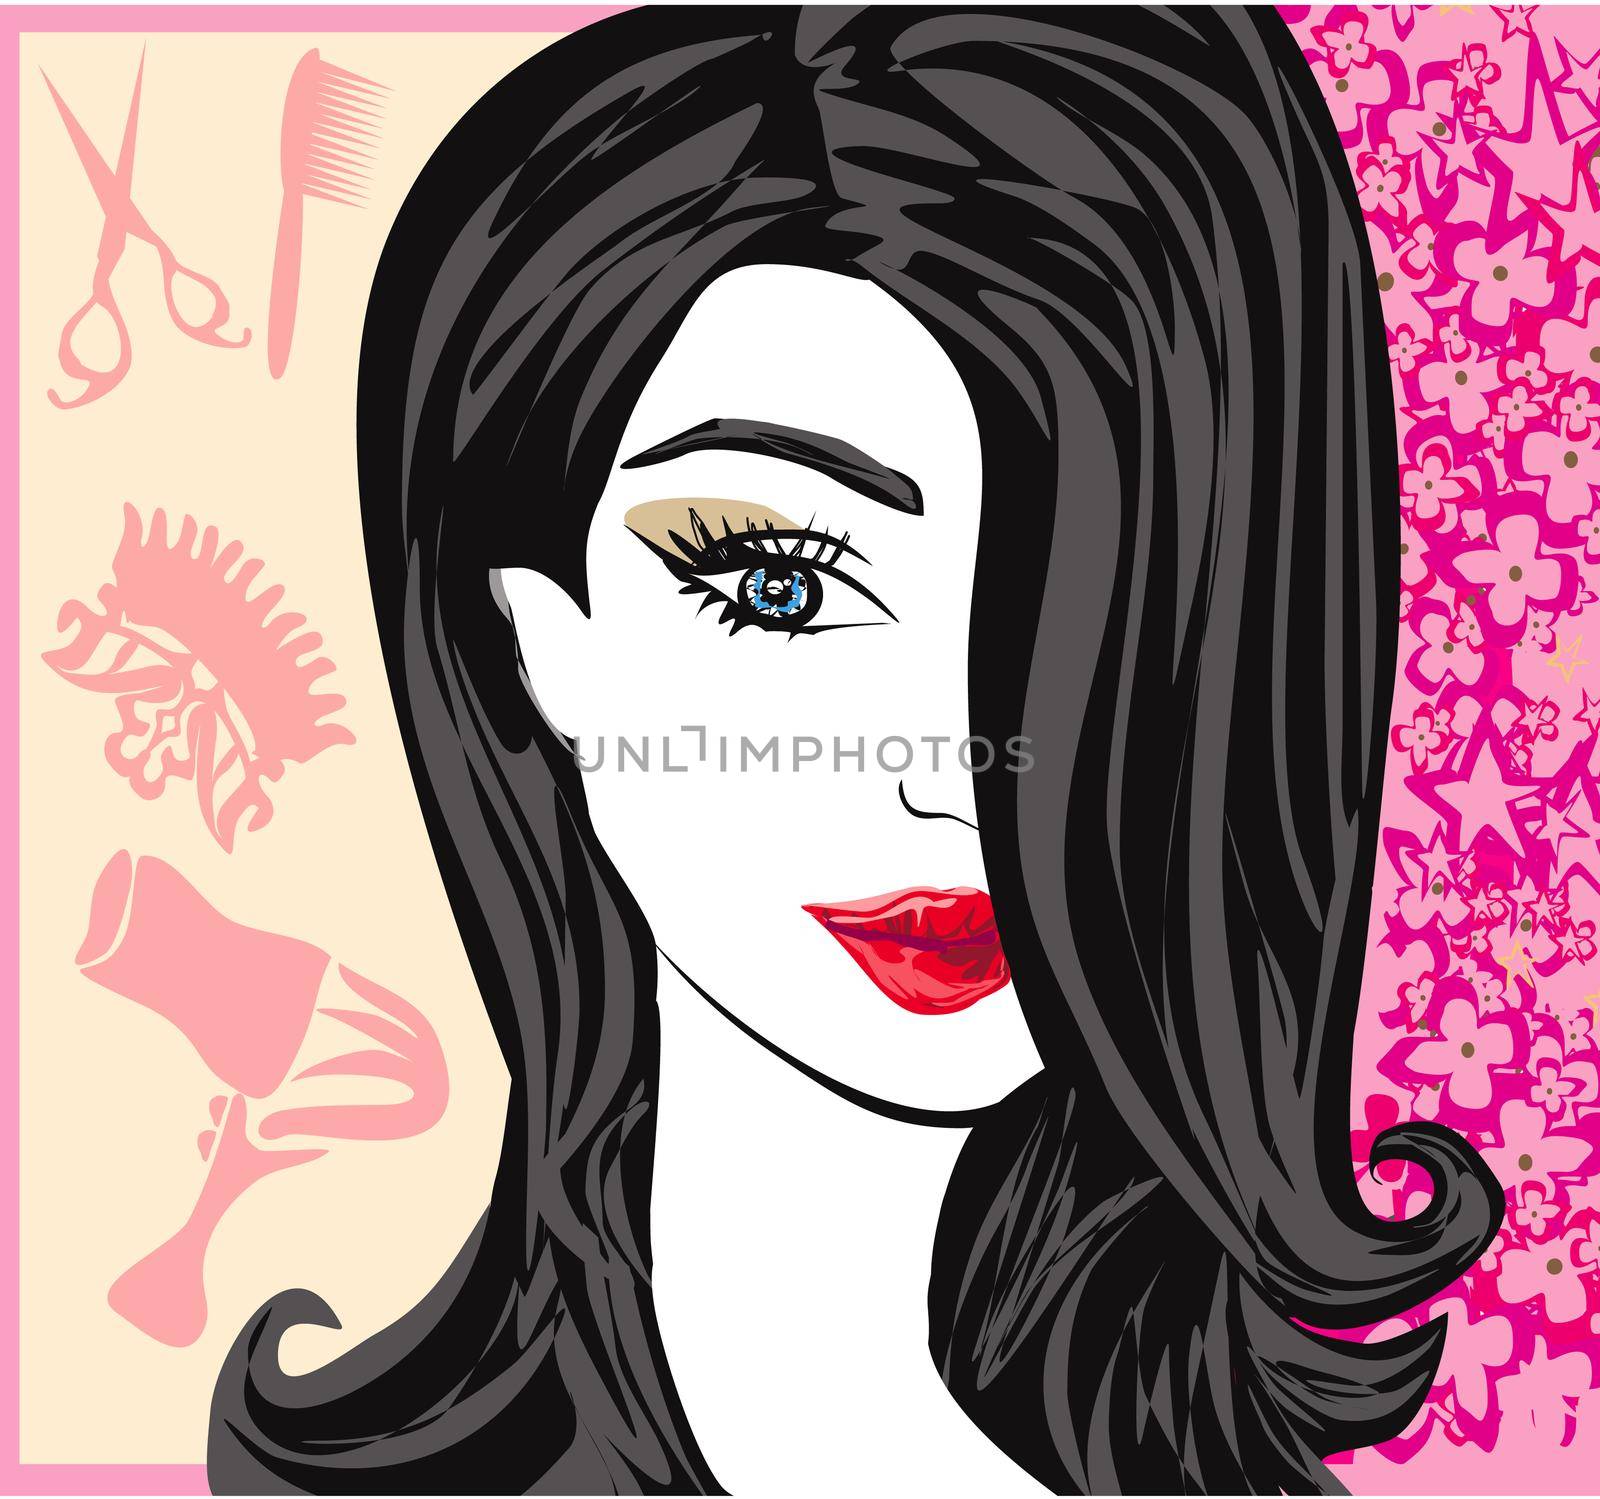 floral background with pretty woman - barber card